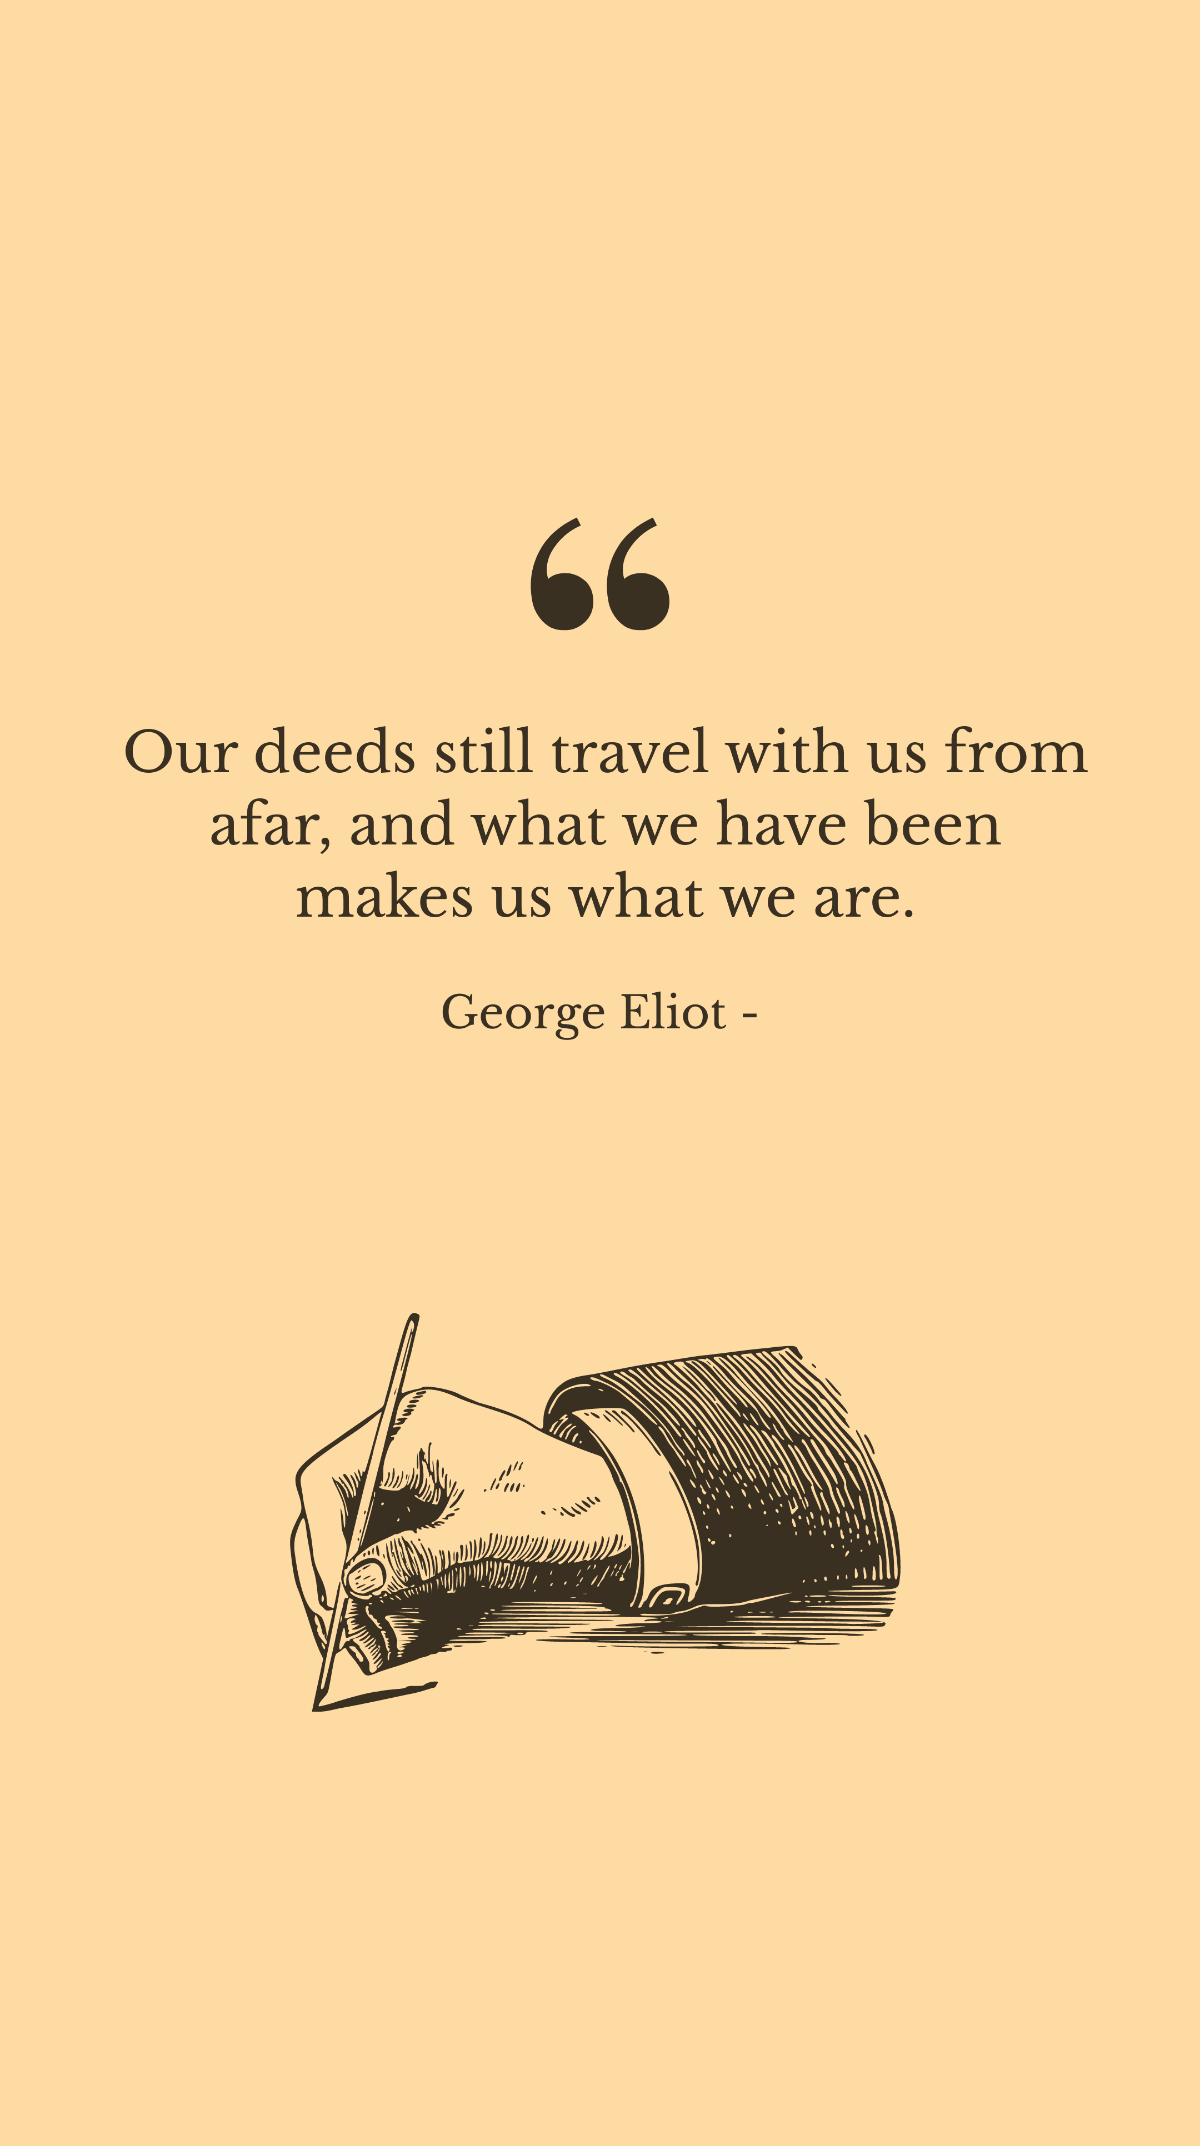 George Eliot - Our deeds still travel with us from afar, and what we have been makes us what we are. Template